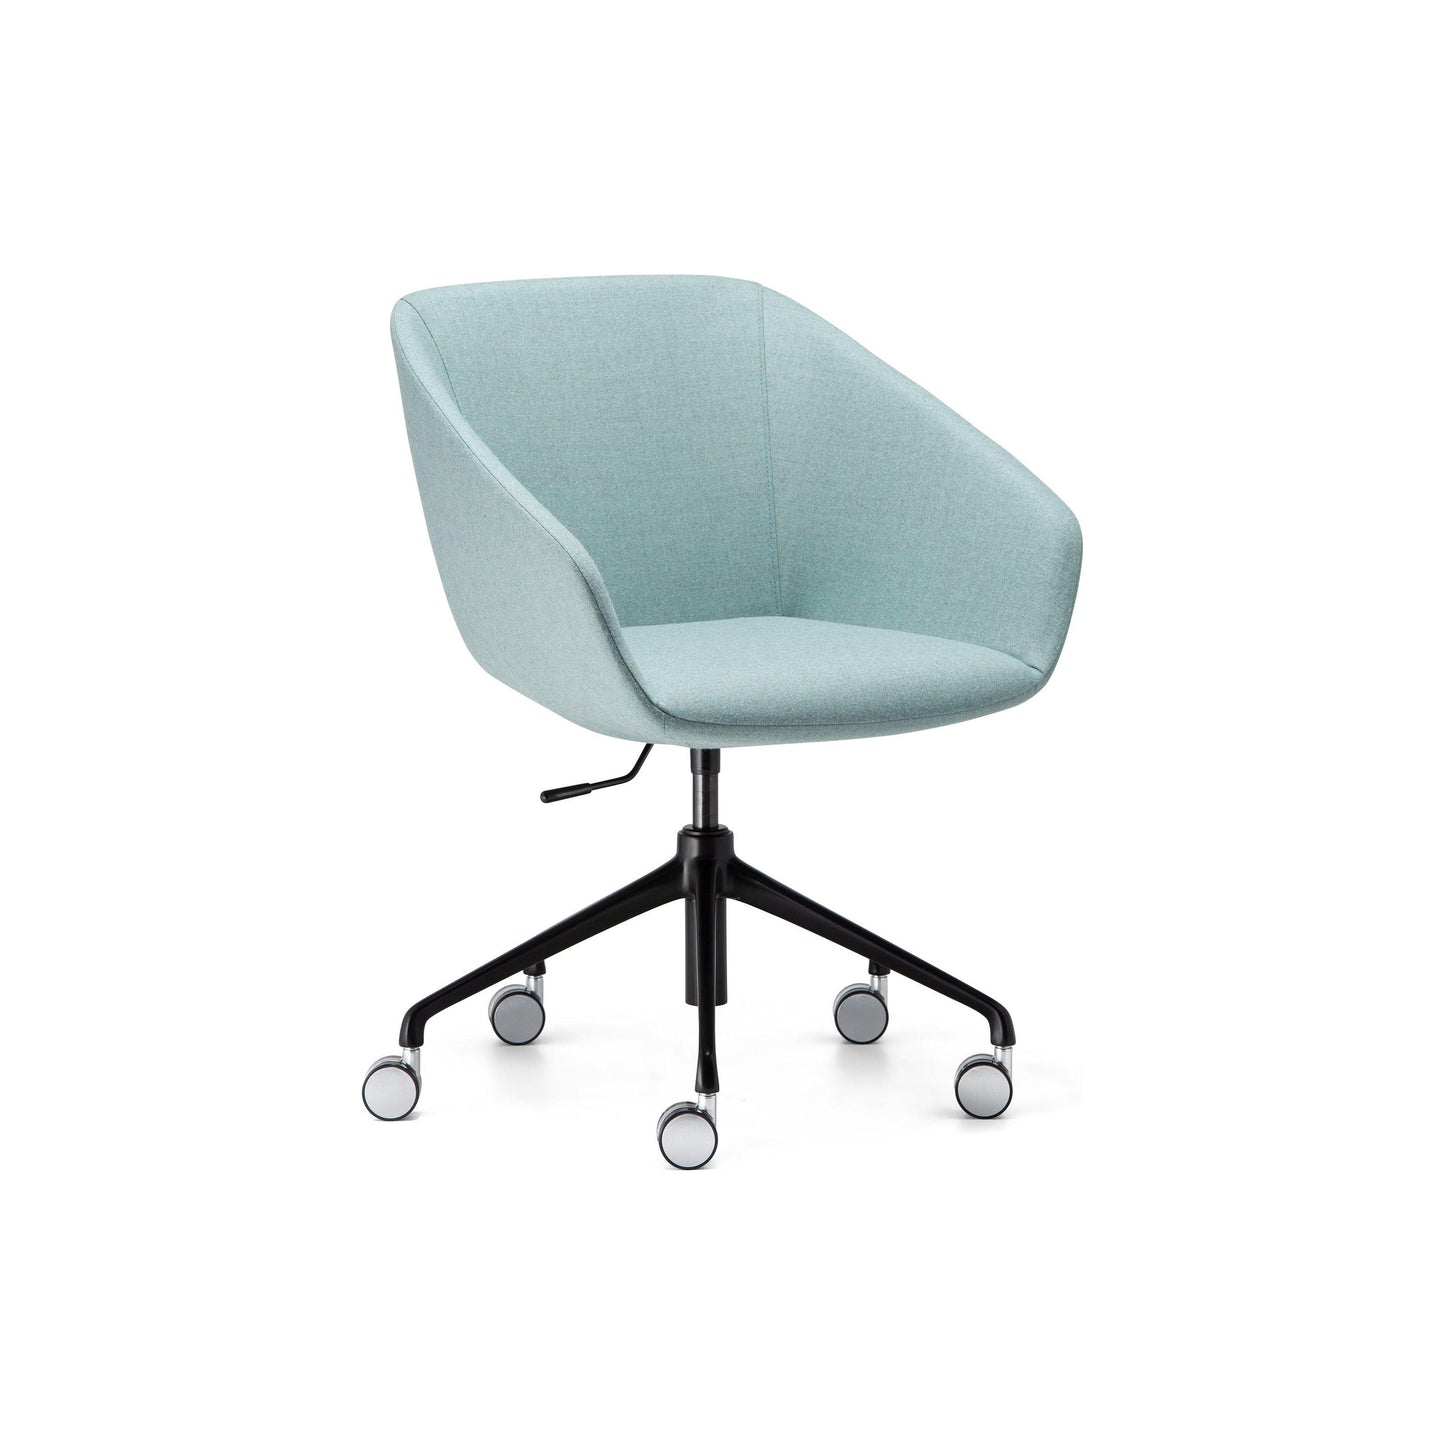 Delphi Upholstered Meeting Chair - Office Furniture Company 